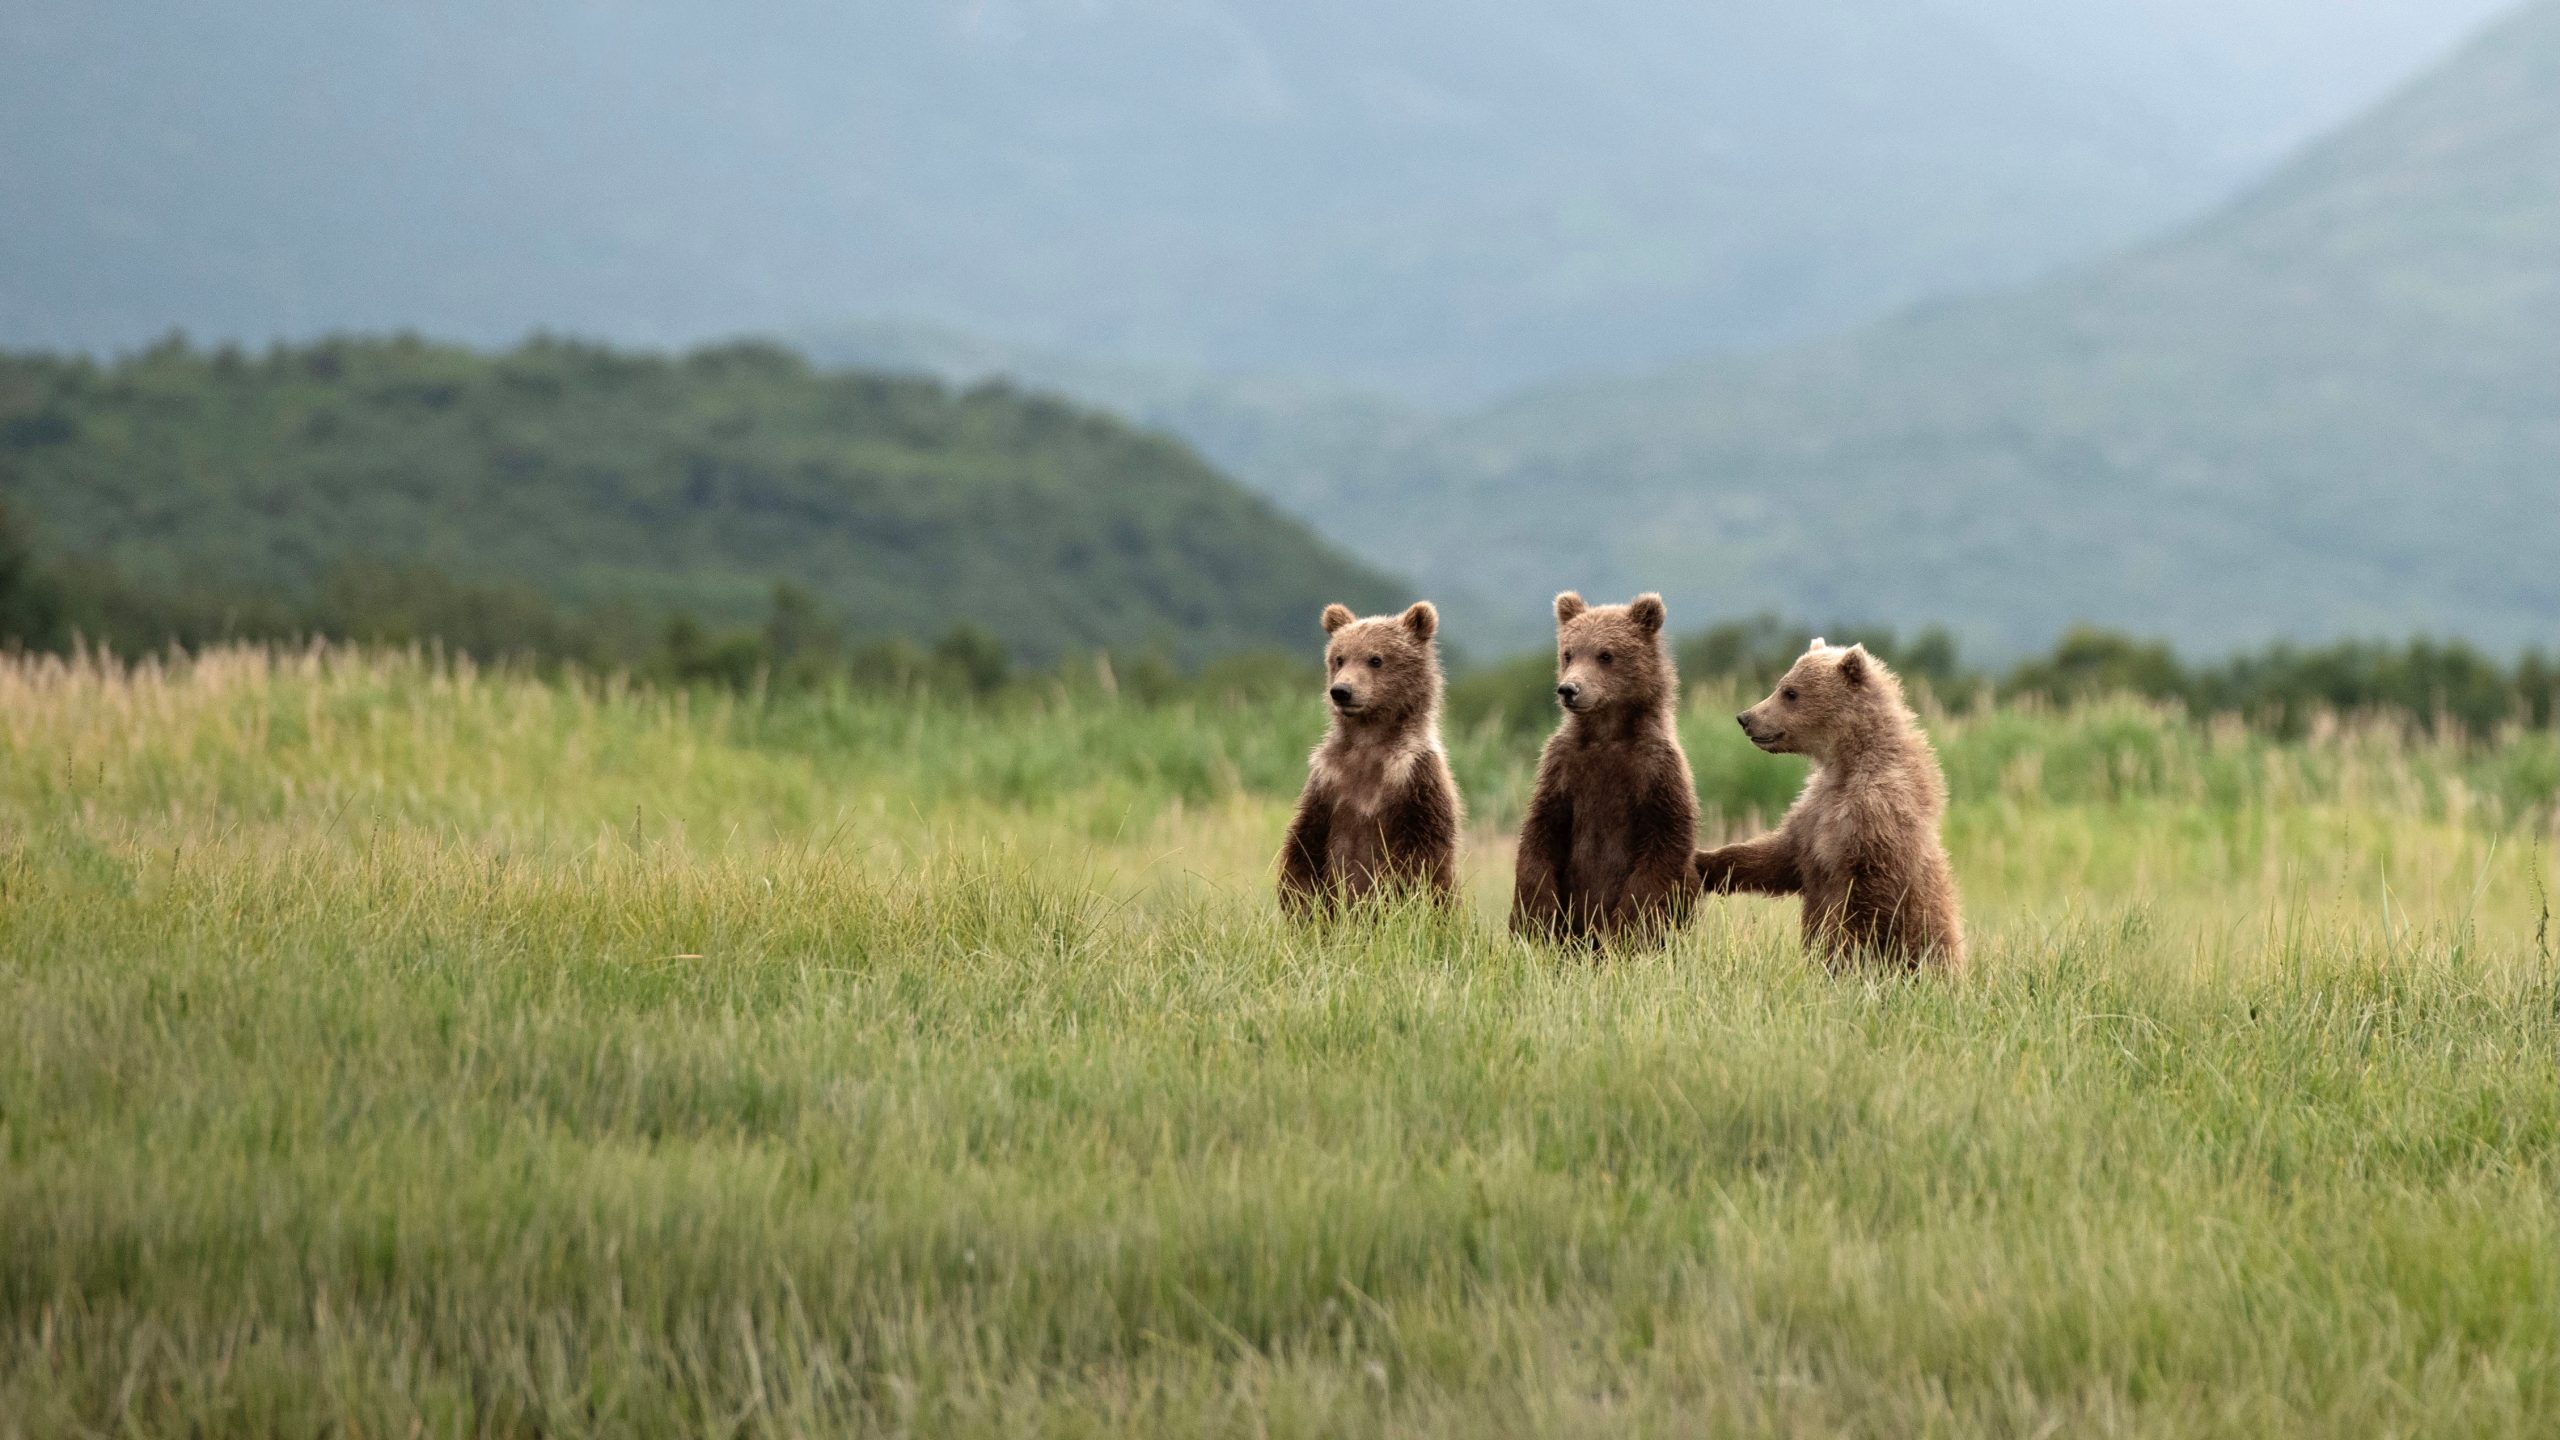 Three young brown bears stand on their hind legs in tall green grass